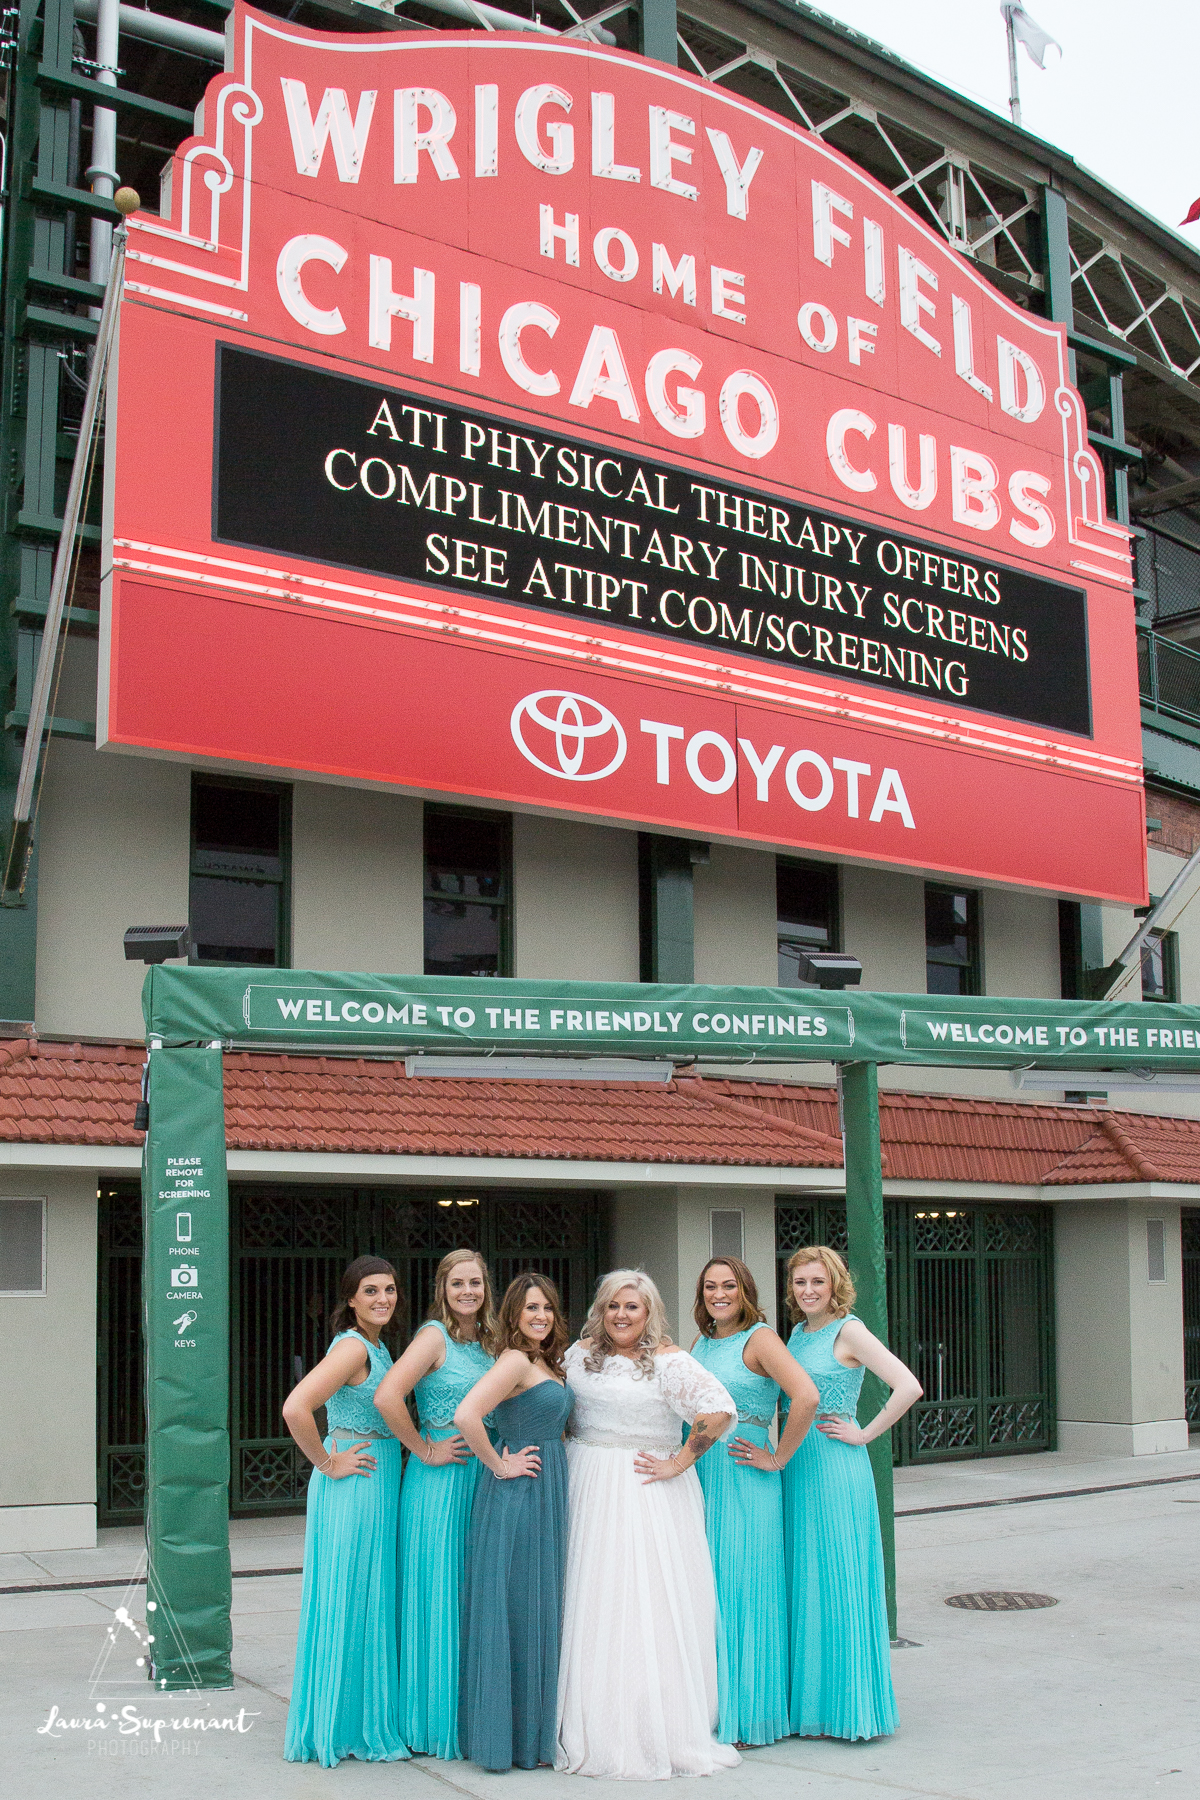 wedding_photography_chicago_wrigley_field_ravenswood_event_center_laura_suprenant (43 of 82).jpg